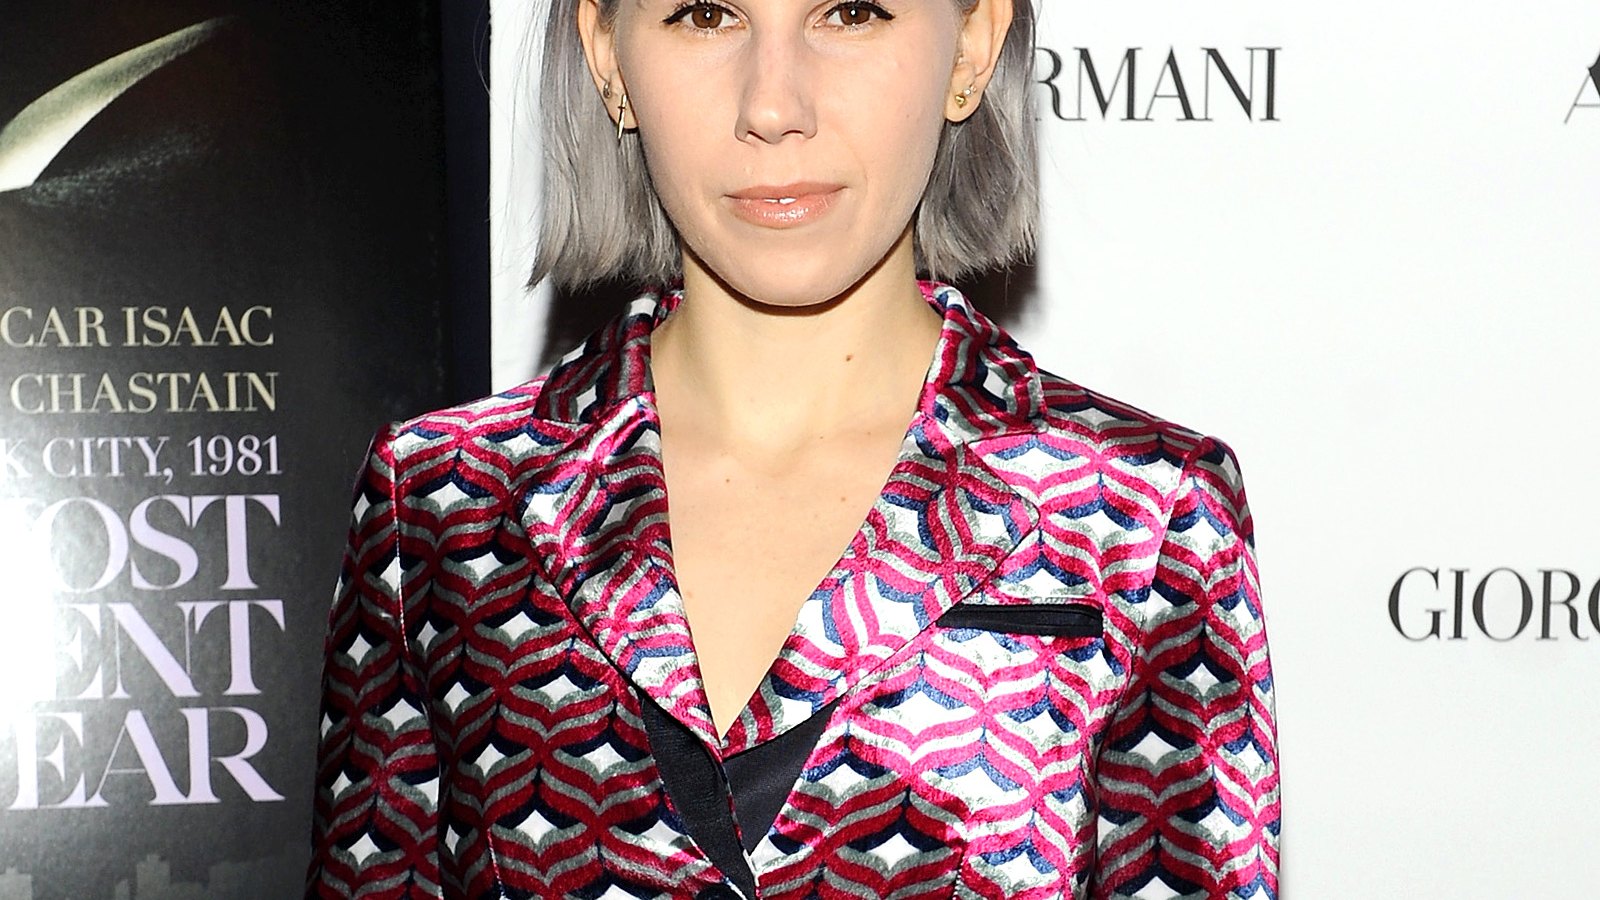 Zosia Mamet at the New York premiere of "A Most Violent Year"